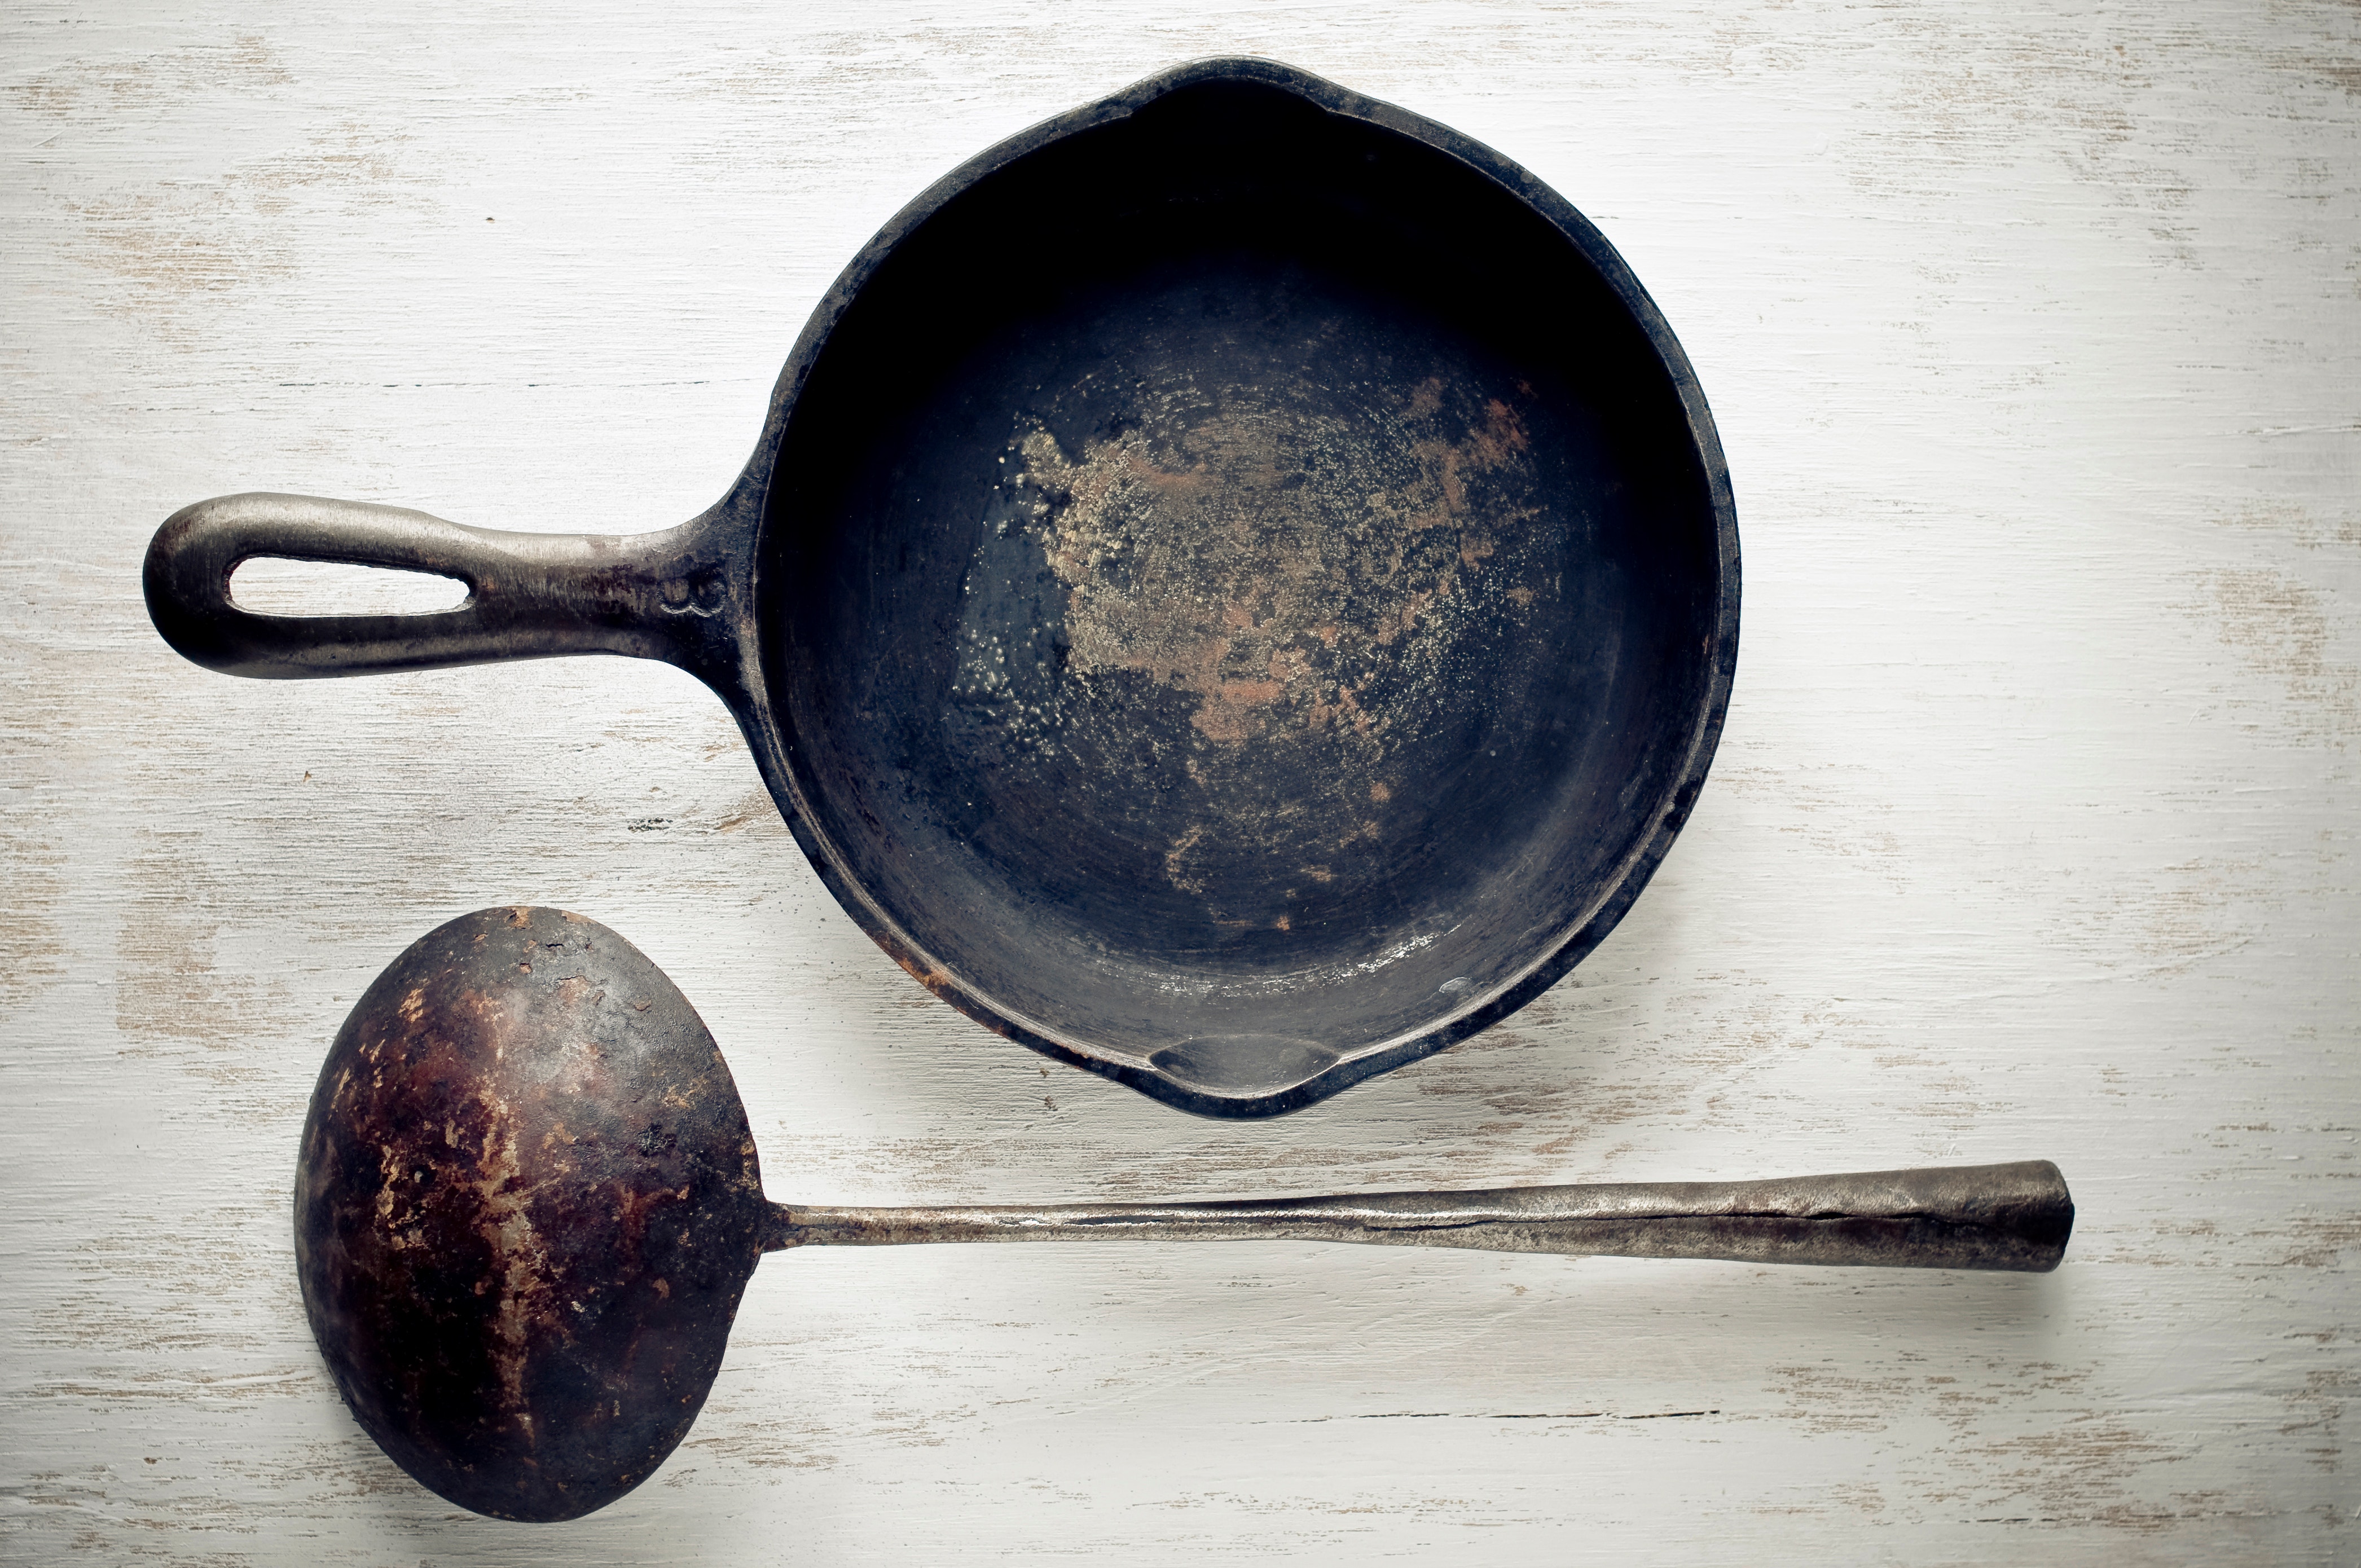 Are Rusty Baking Pans Unhealthy?